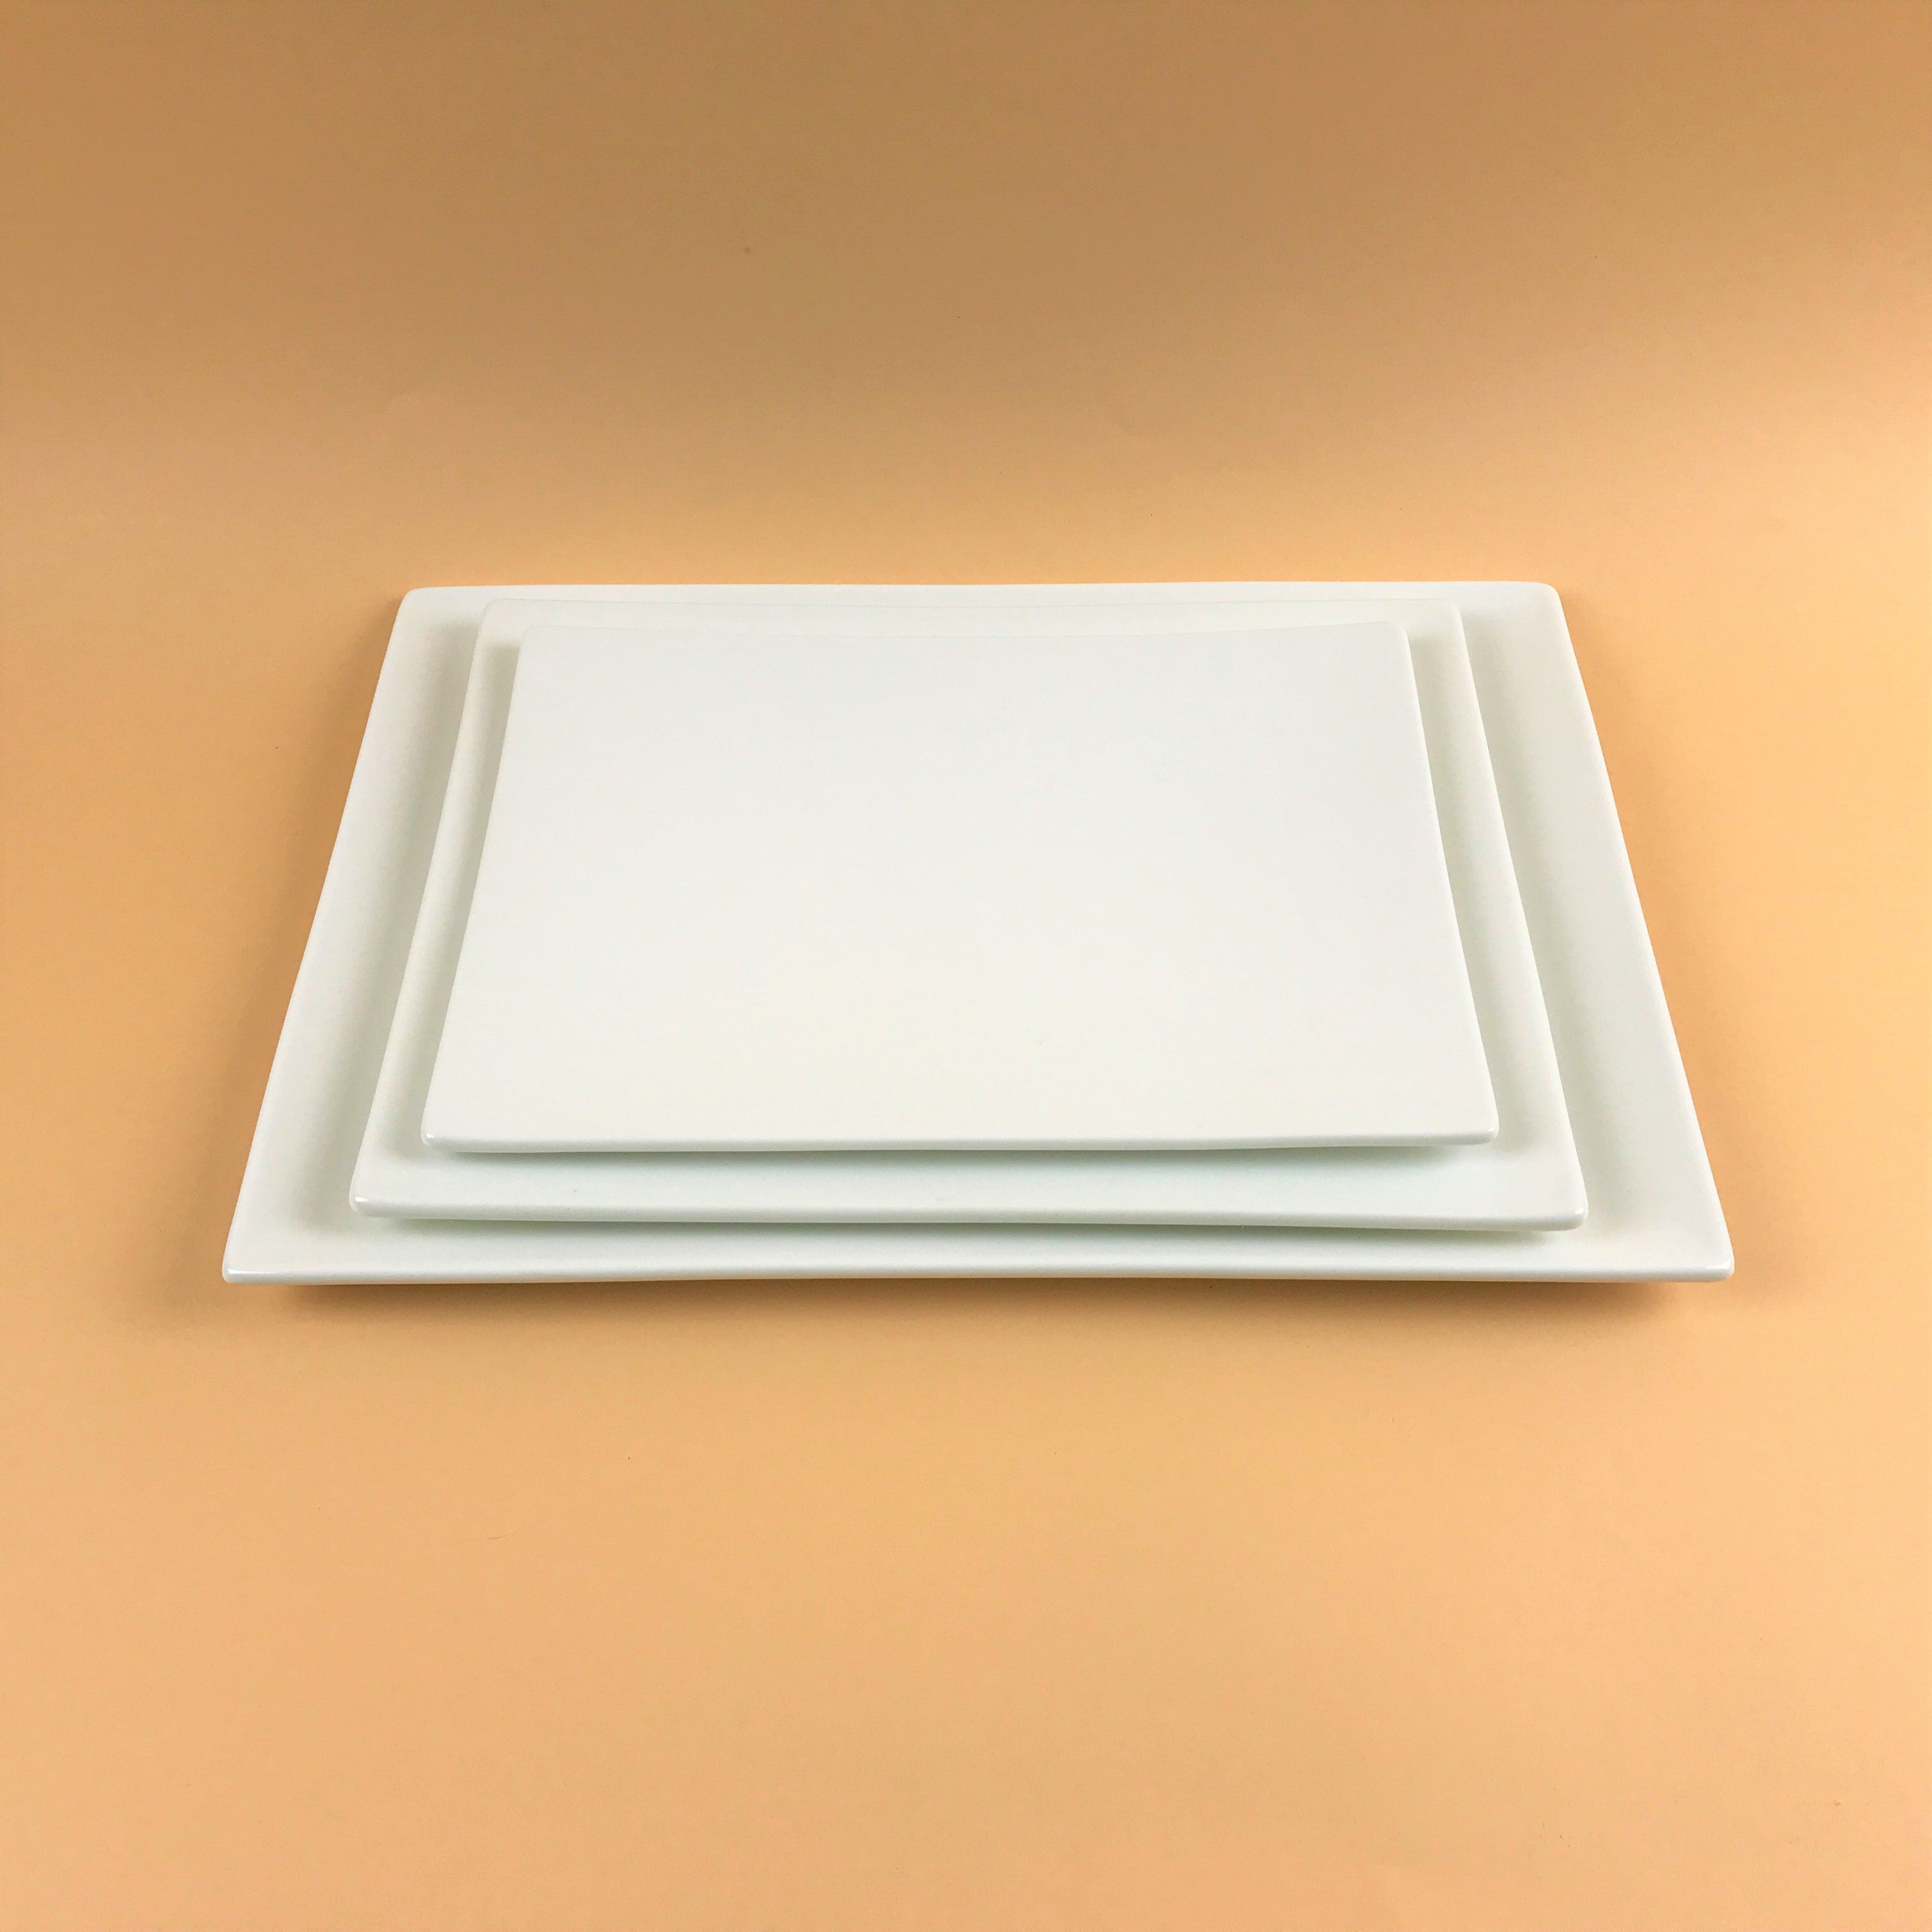 Heavy Duty Restaurant-Use White Square Plates in 6 sizes, 5 1/4 